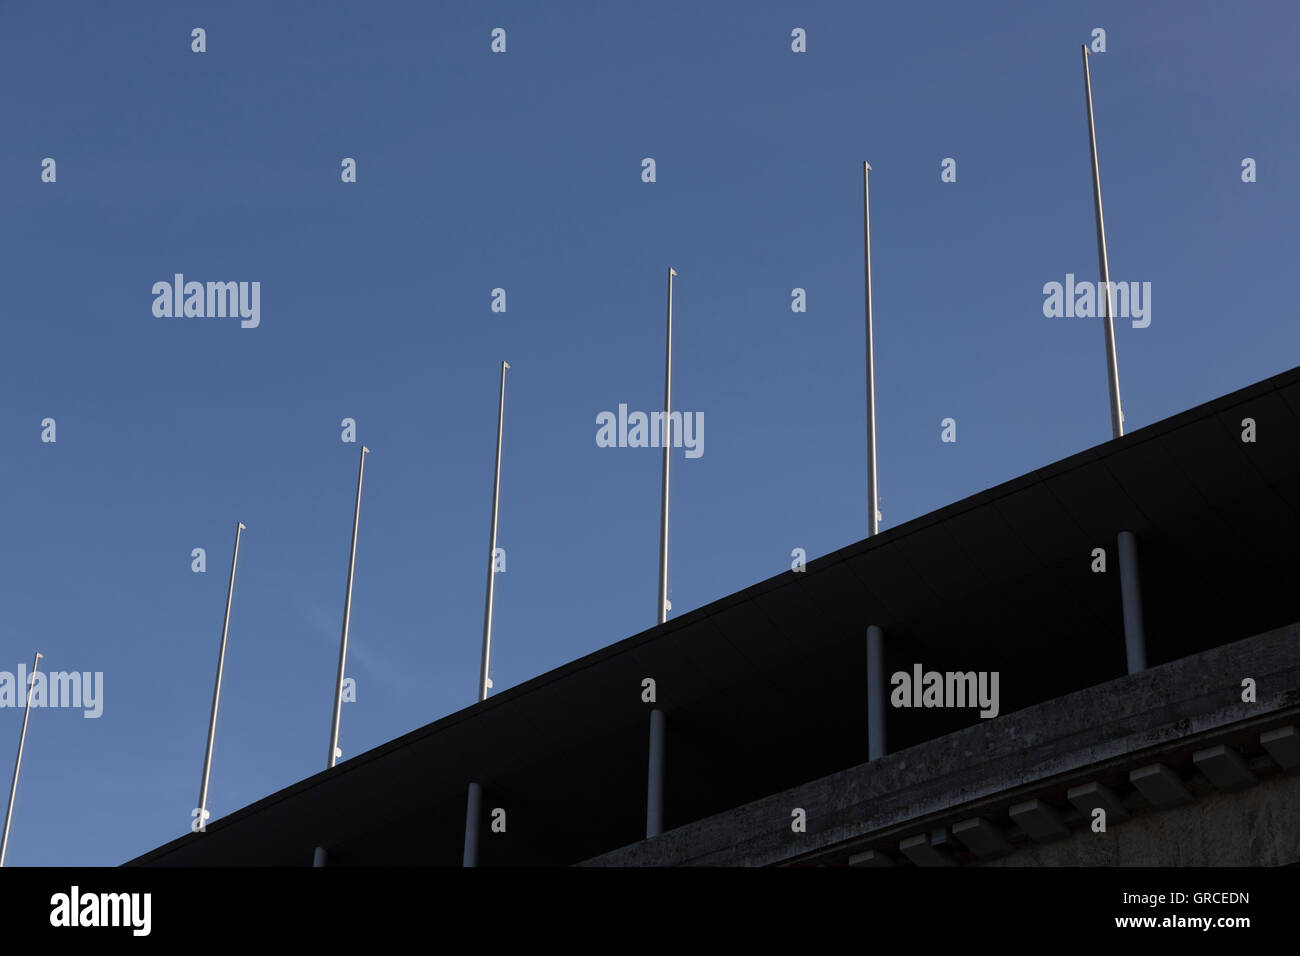 Number Of Flagpoles At The Olympic Stadium In Berlin Stock Photo